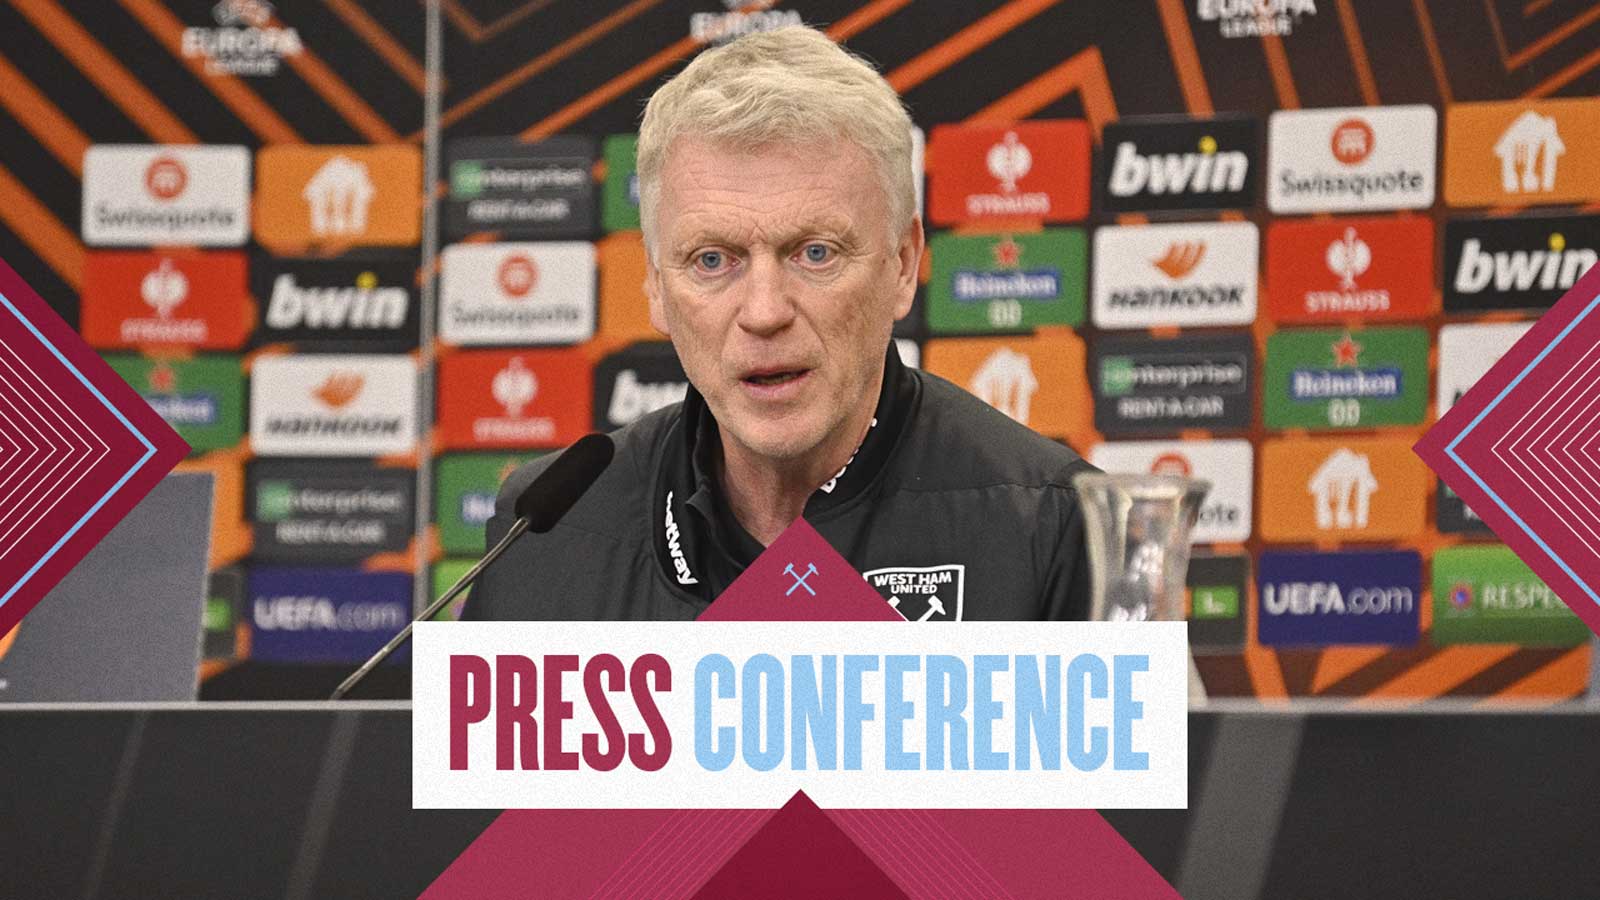 David Moyes speaks at a press conference